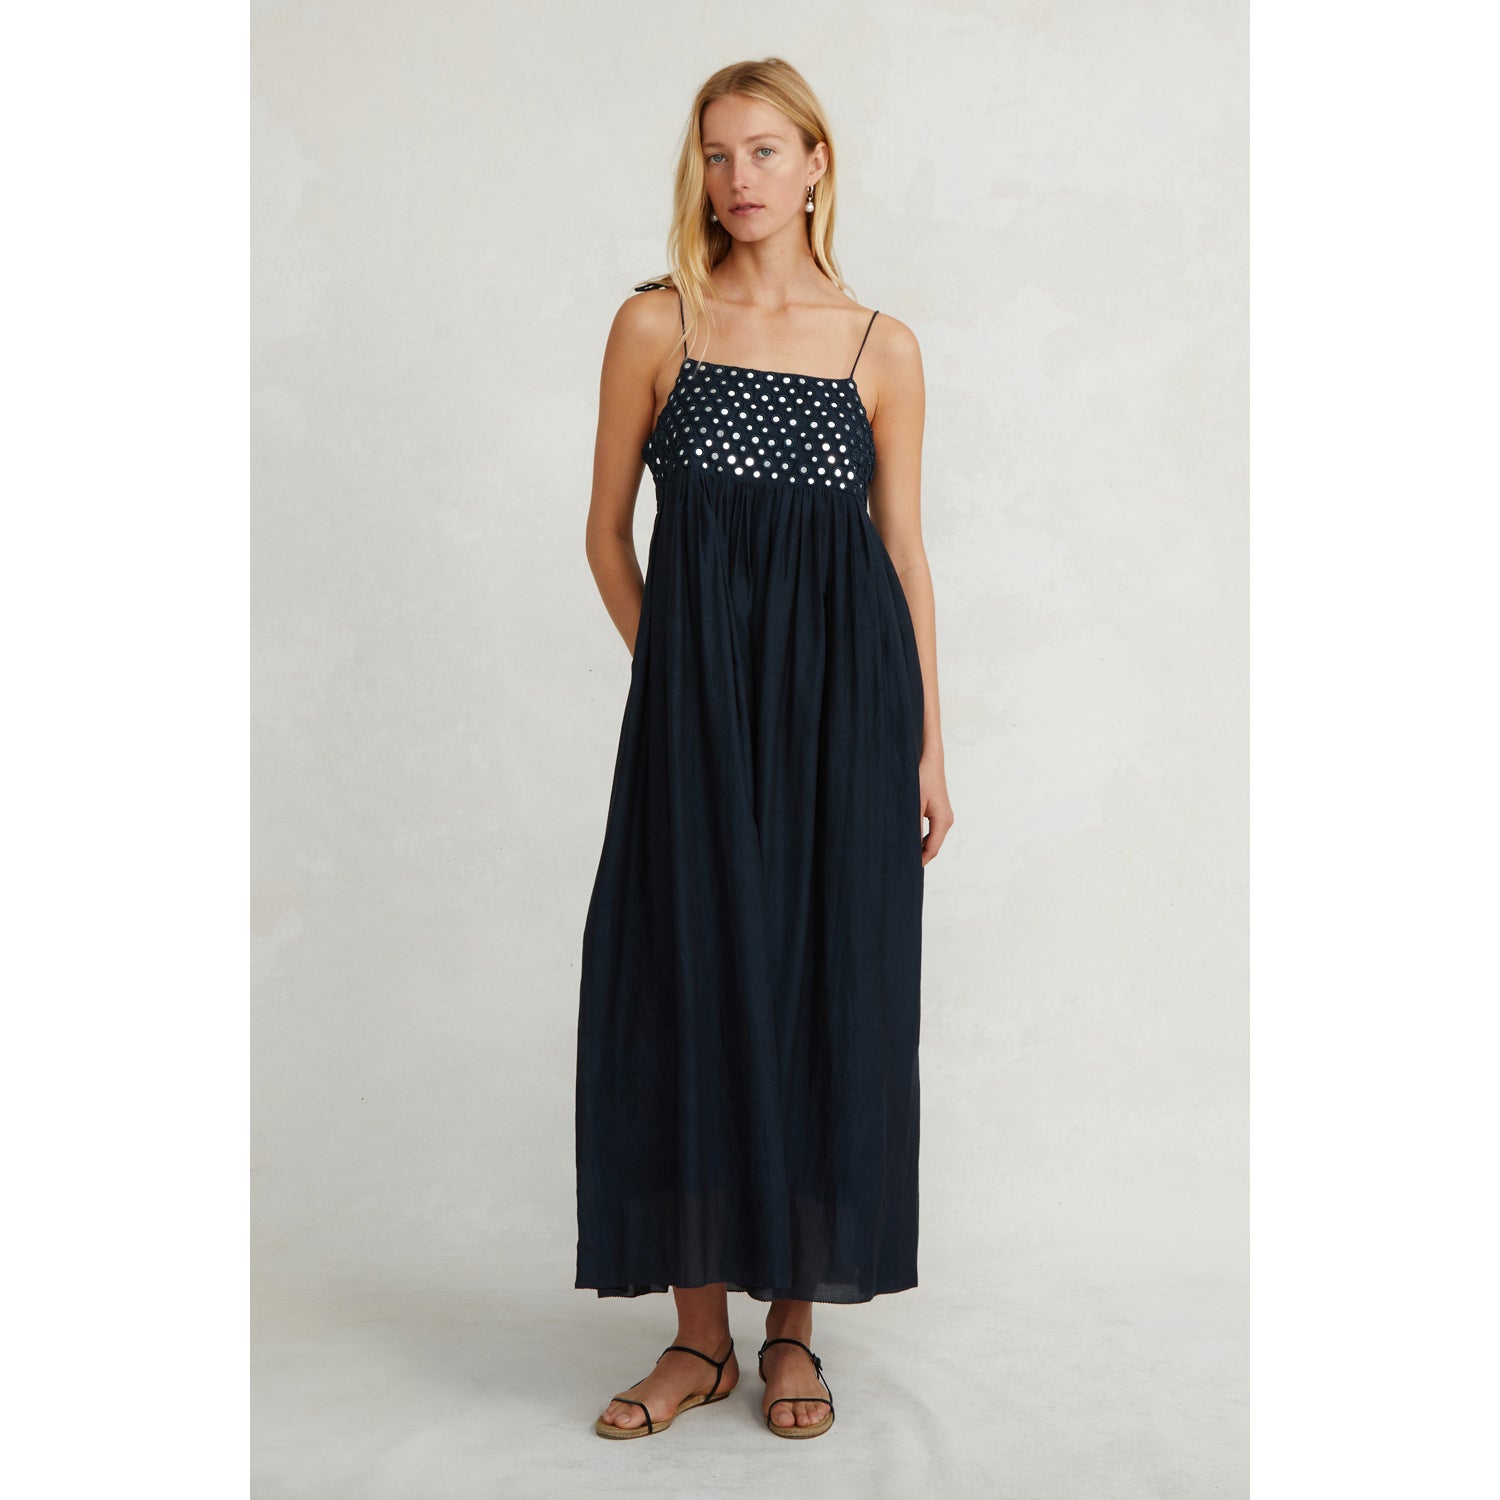 Sahara Dress - Navy with Mirror Sequin Accents